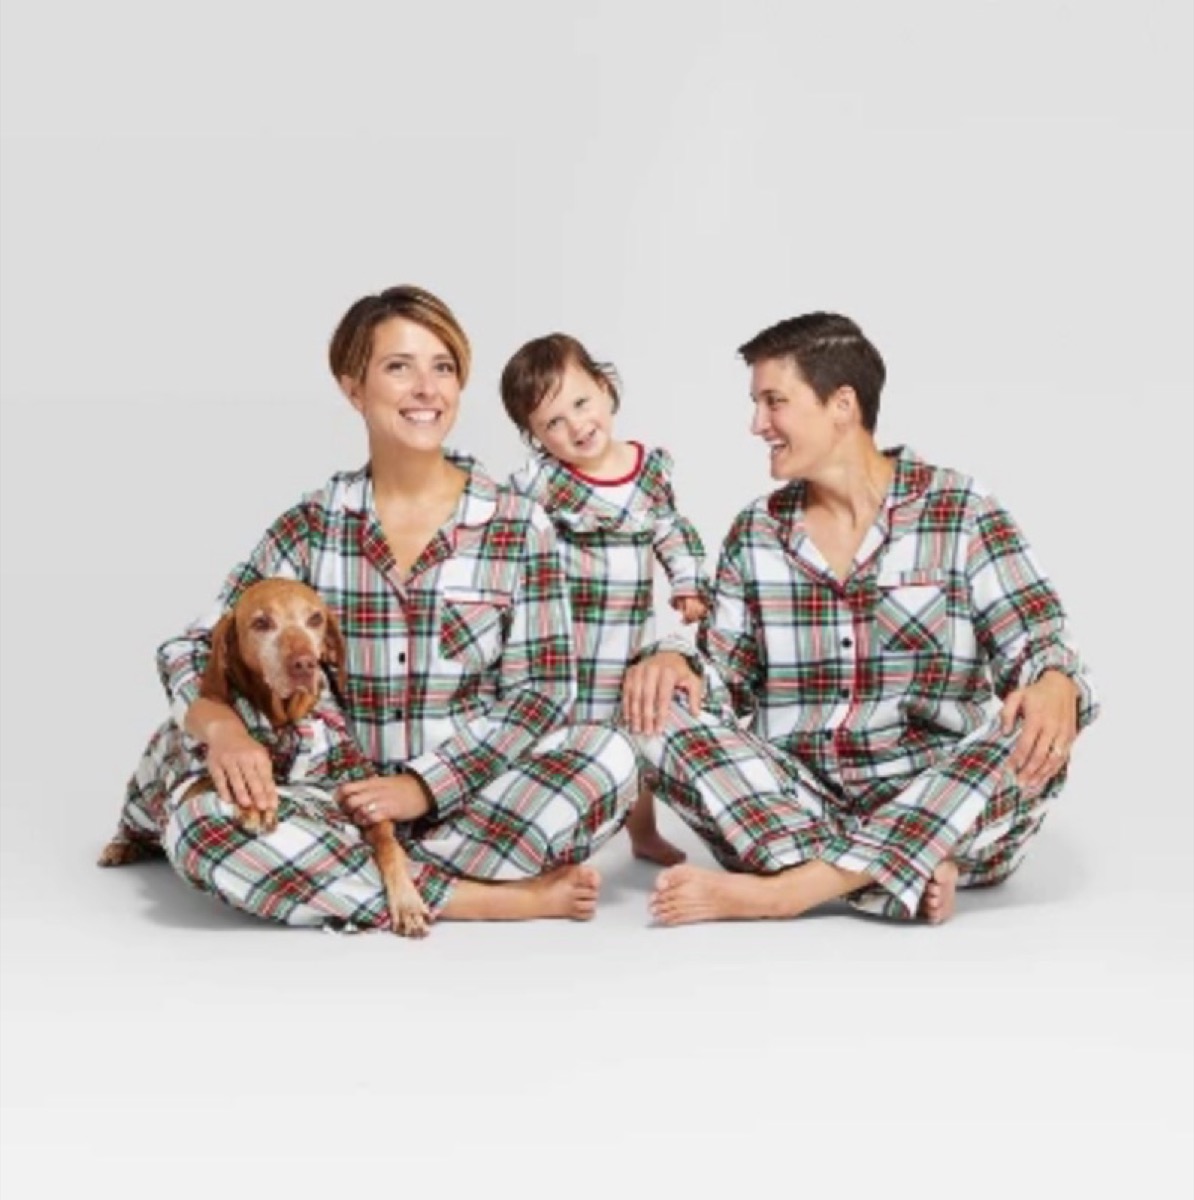 two mothers with daughter and dog in plaid pajamas